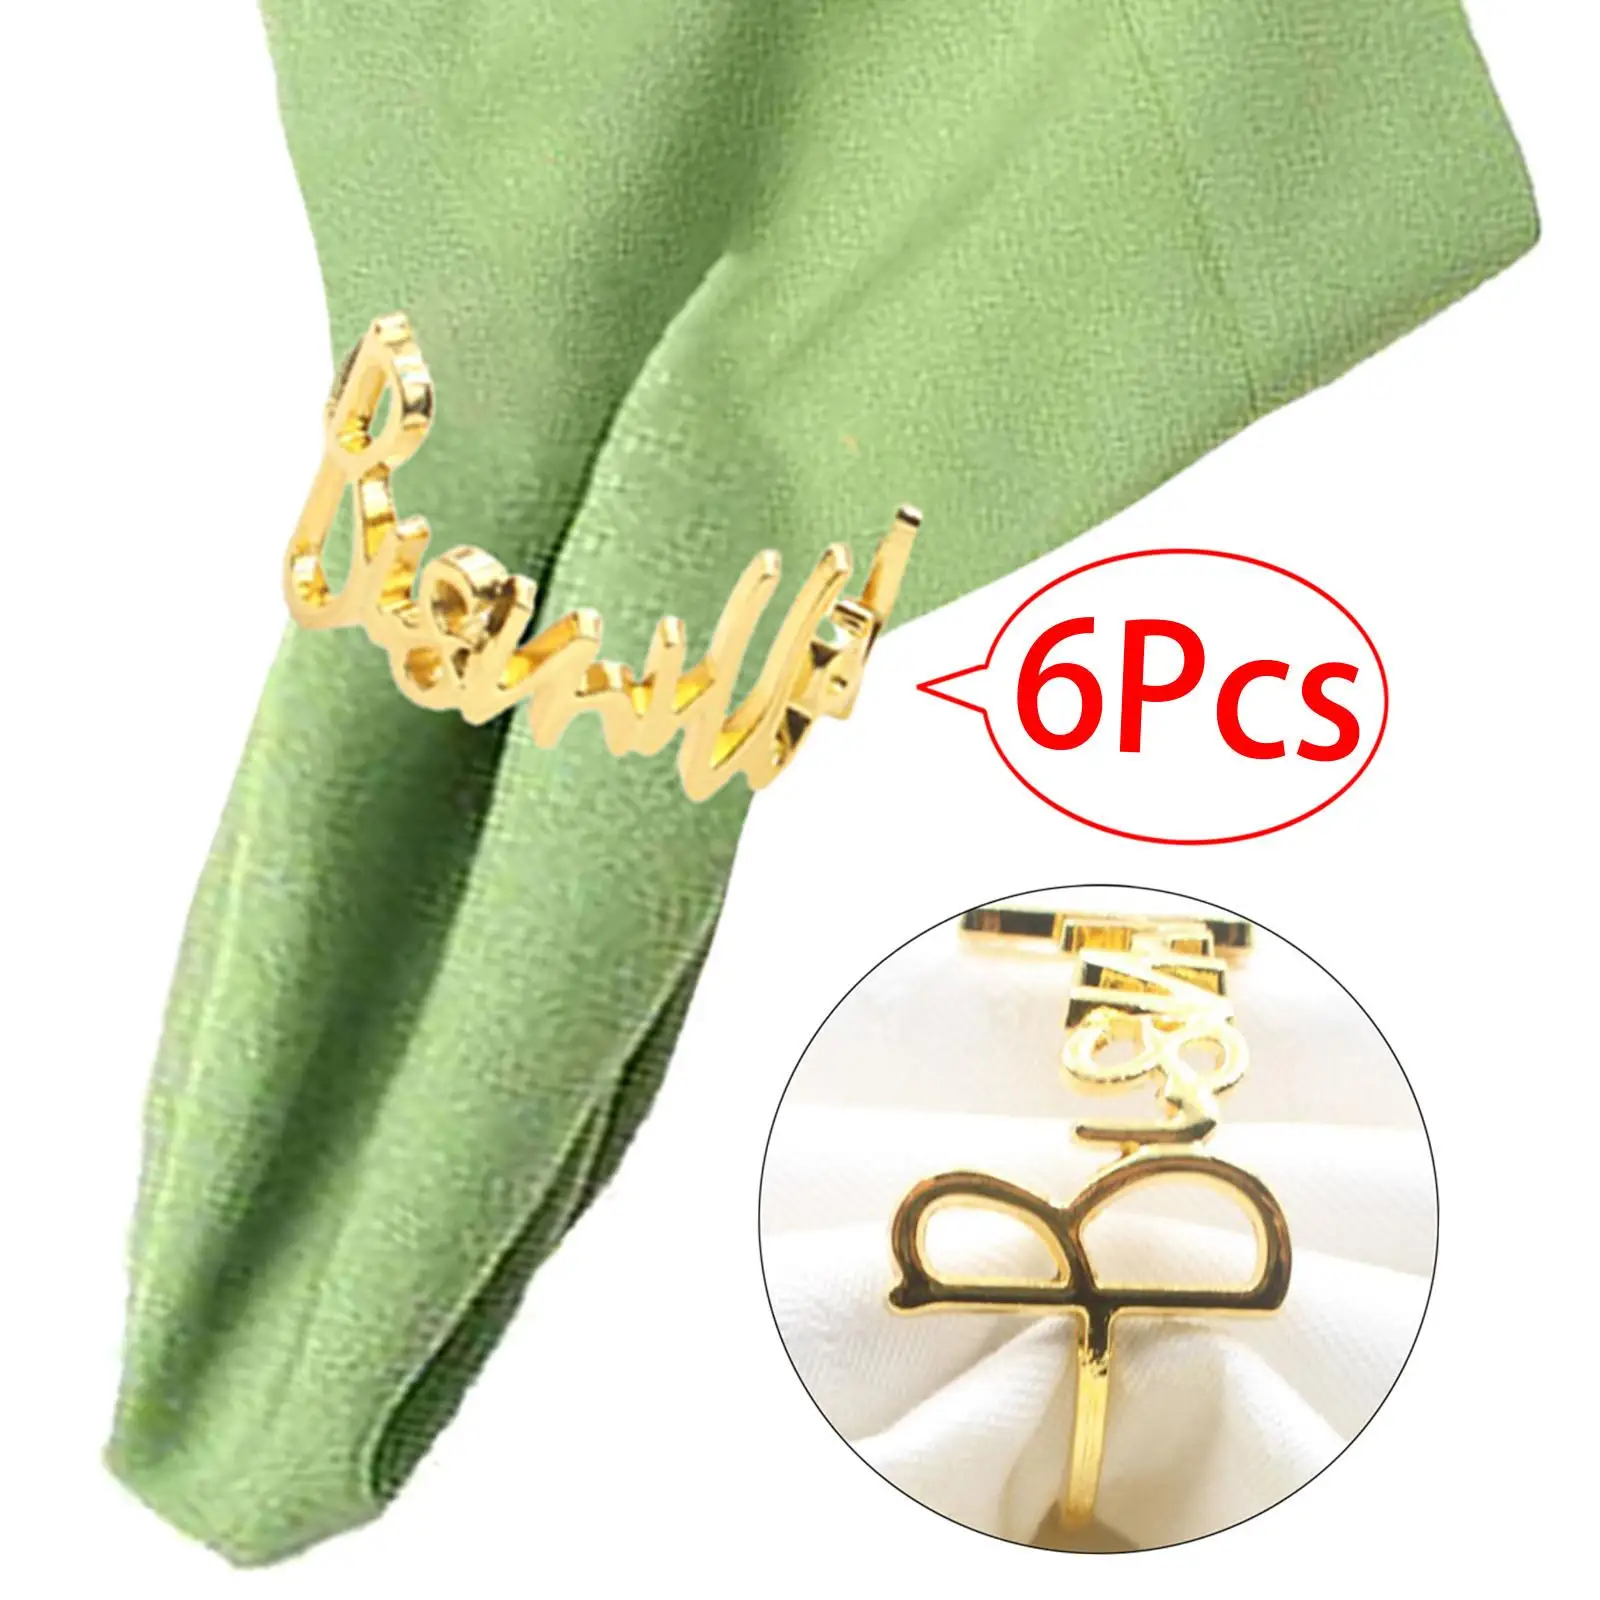 Napkin Rings Crafts Adornment Decoration Simple Napkin Rings Holder for Family Gathering Receptions Weddings Holidays Kitchen